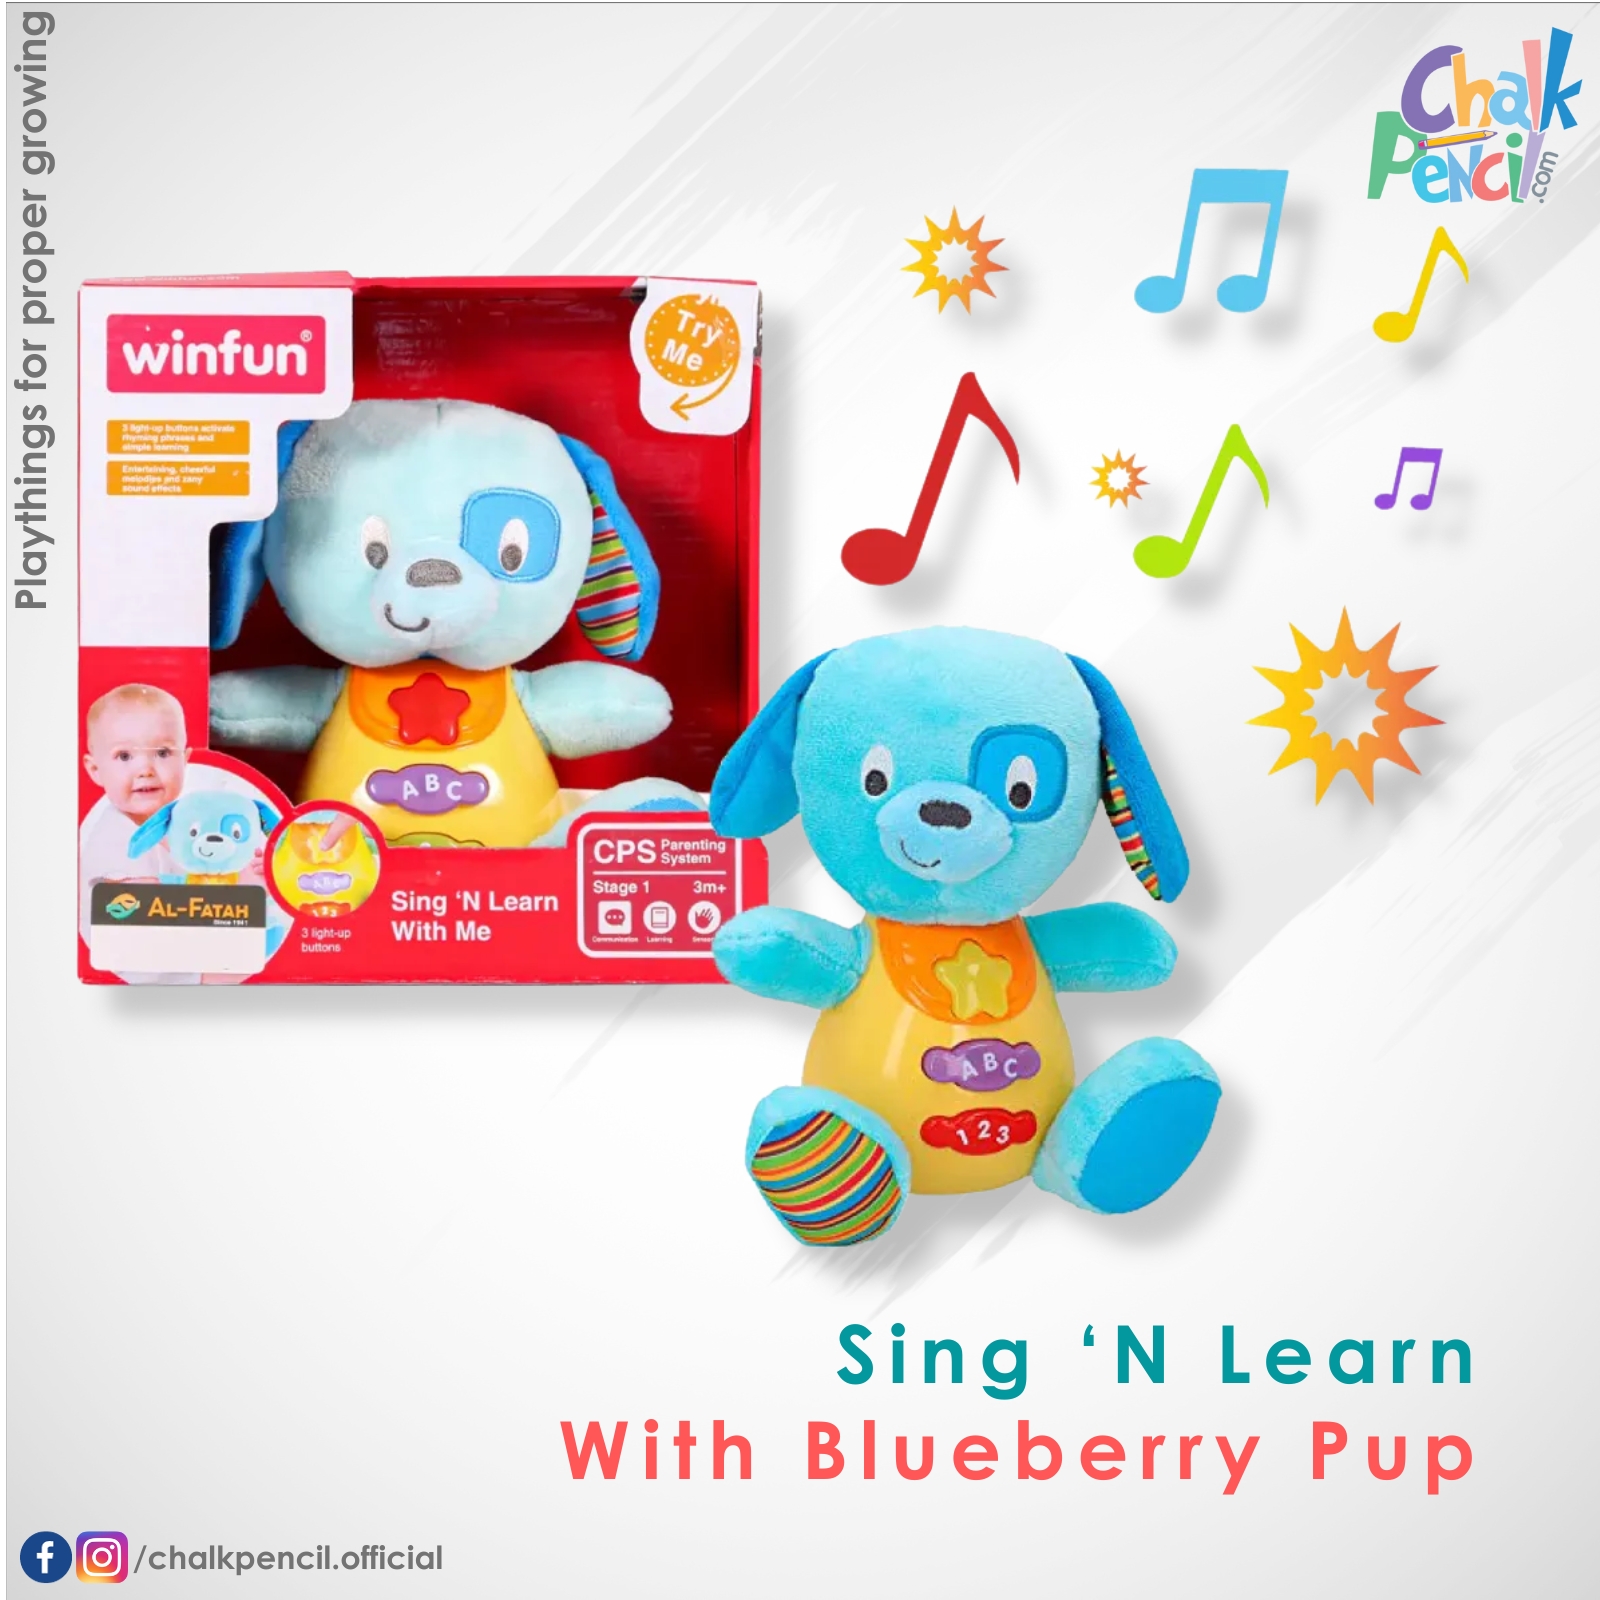 Winfun 000686 Blueberry Pup Sing N Learn